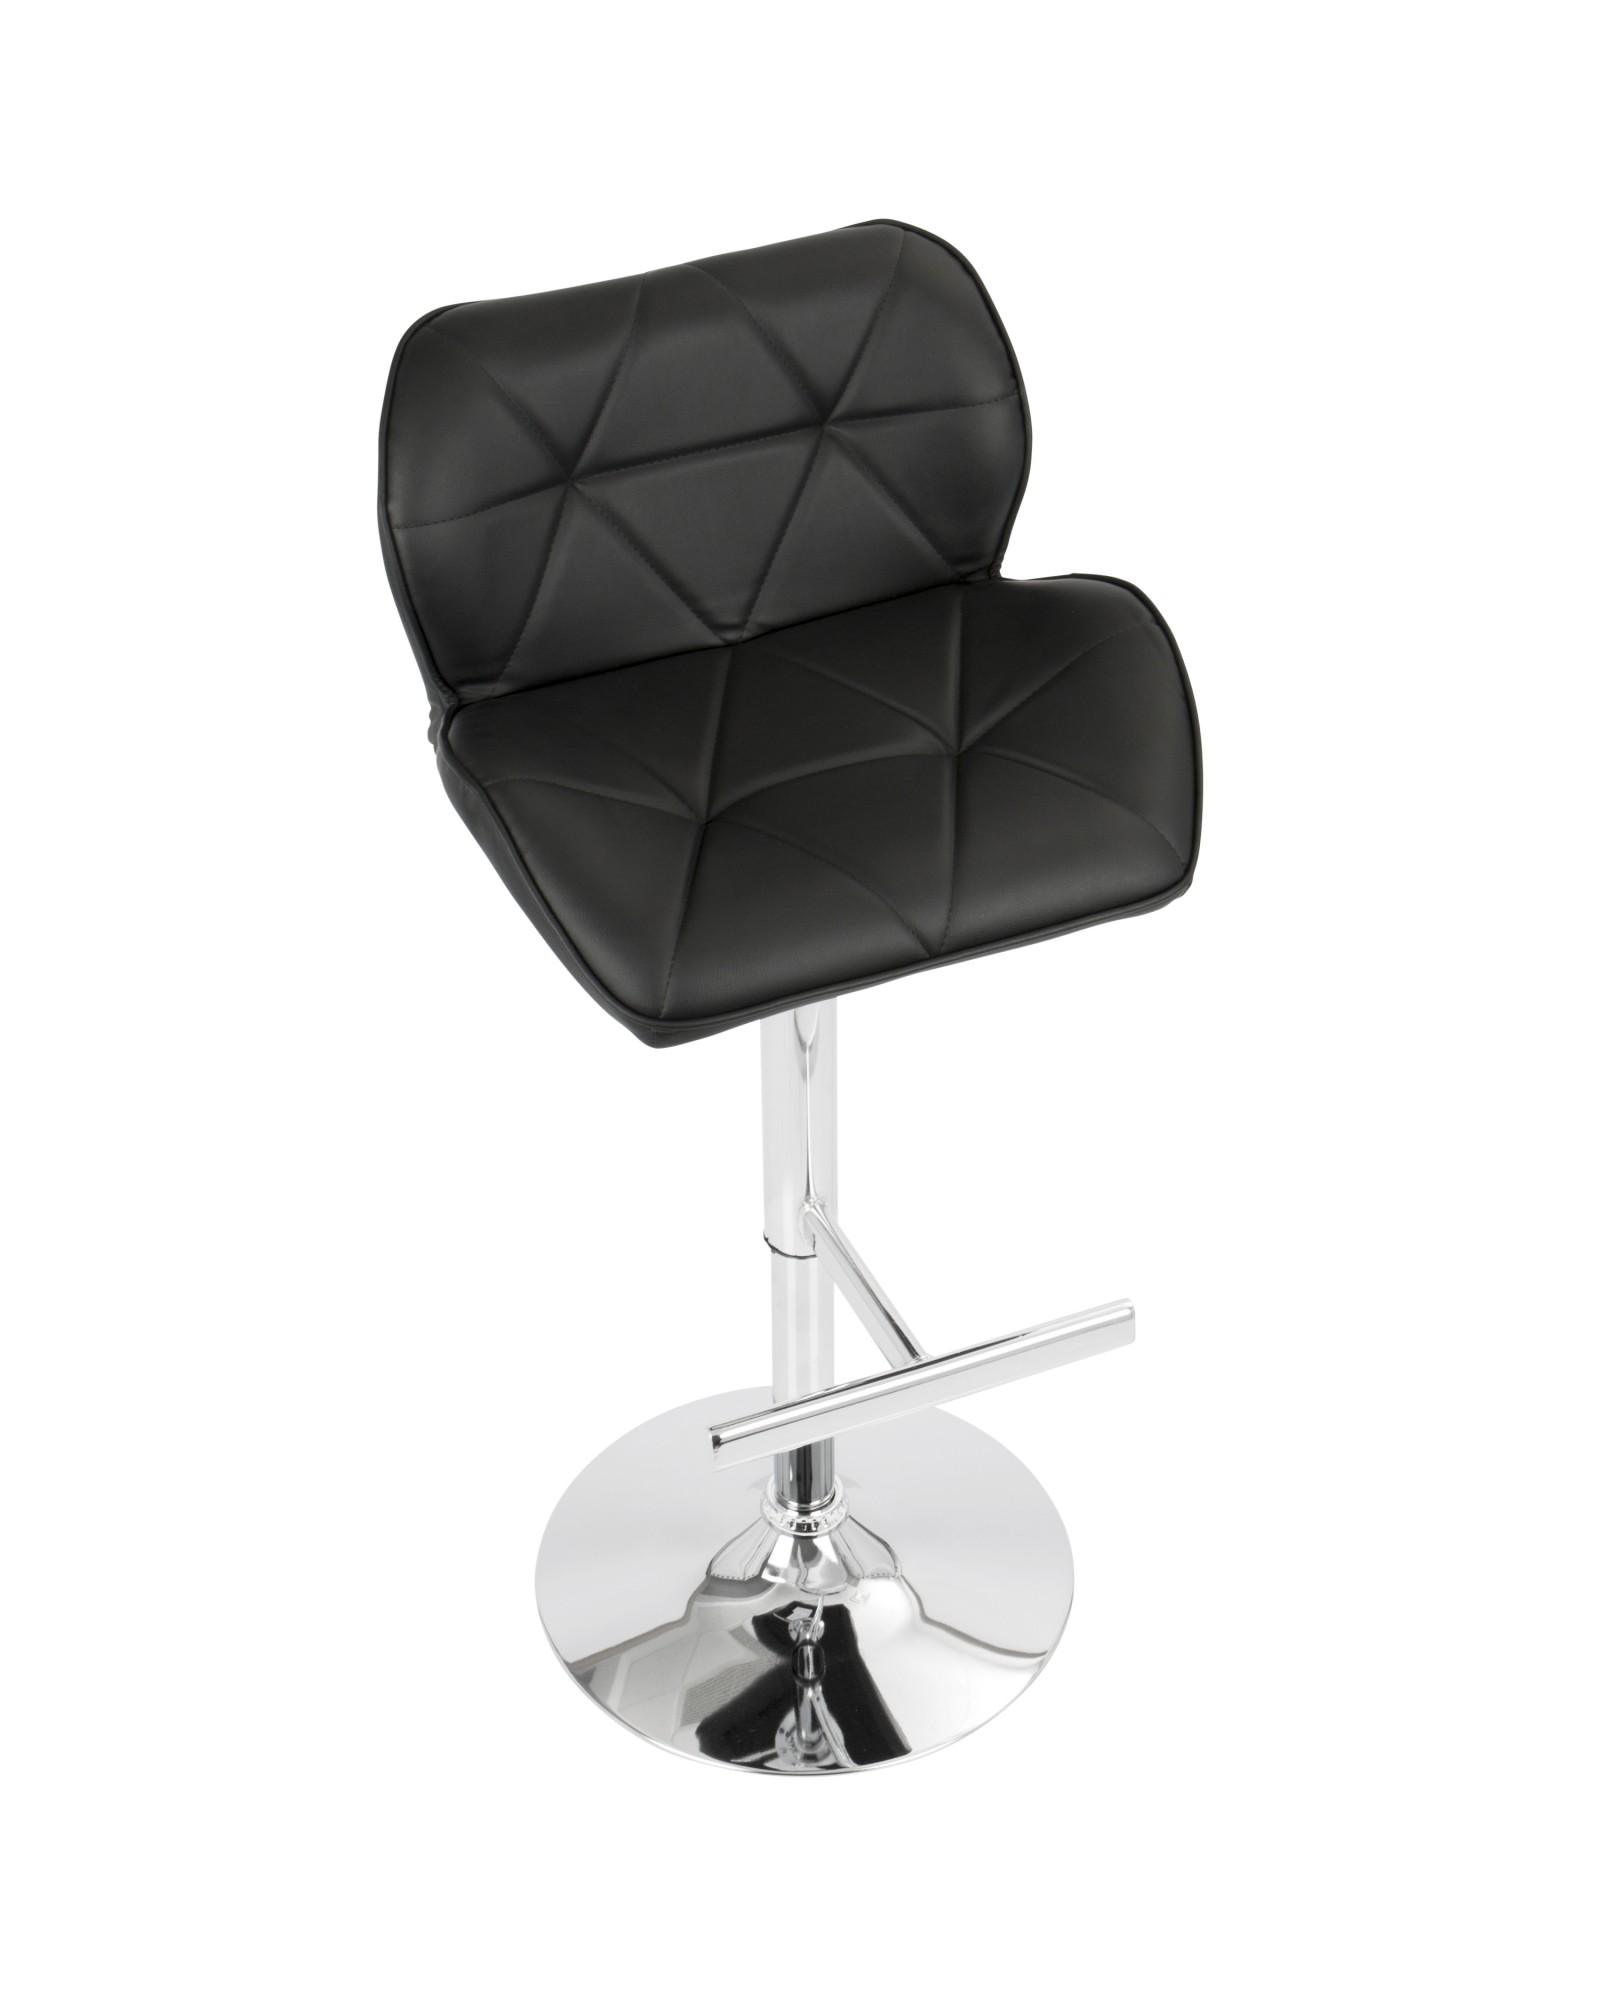 Jubilee Contemporary Adjustable Barstool with Swivel in Black Faux Leather